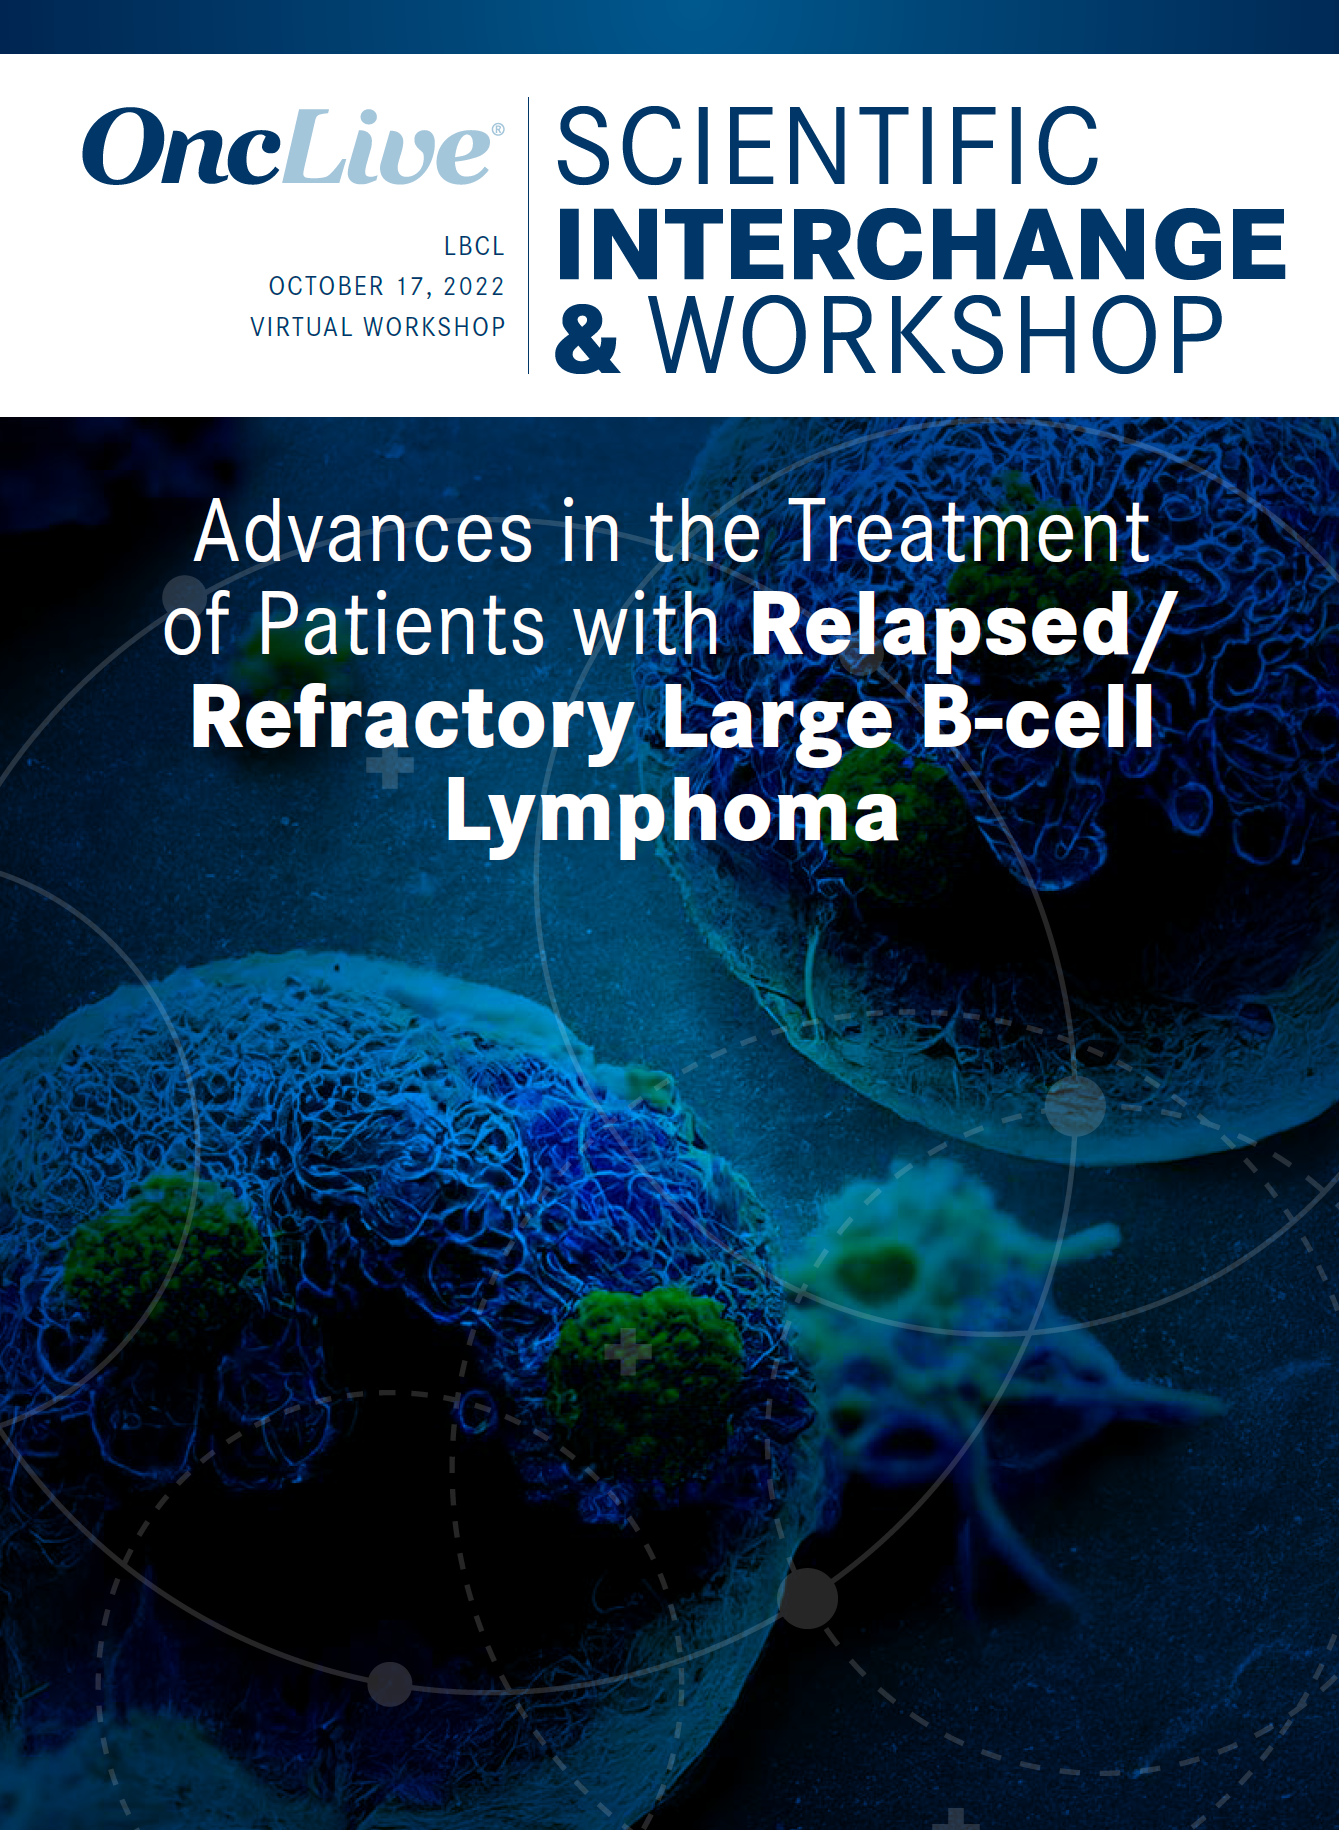 Advances in the Treatment of Patients with Relapsed/Refractory Diffuse Large B-Cell Lymphoma